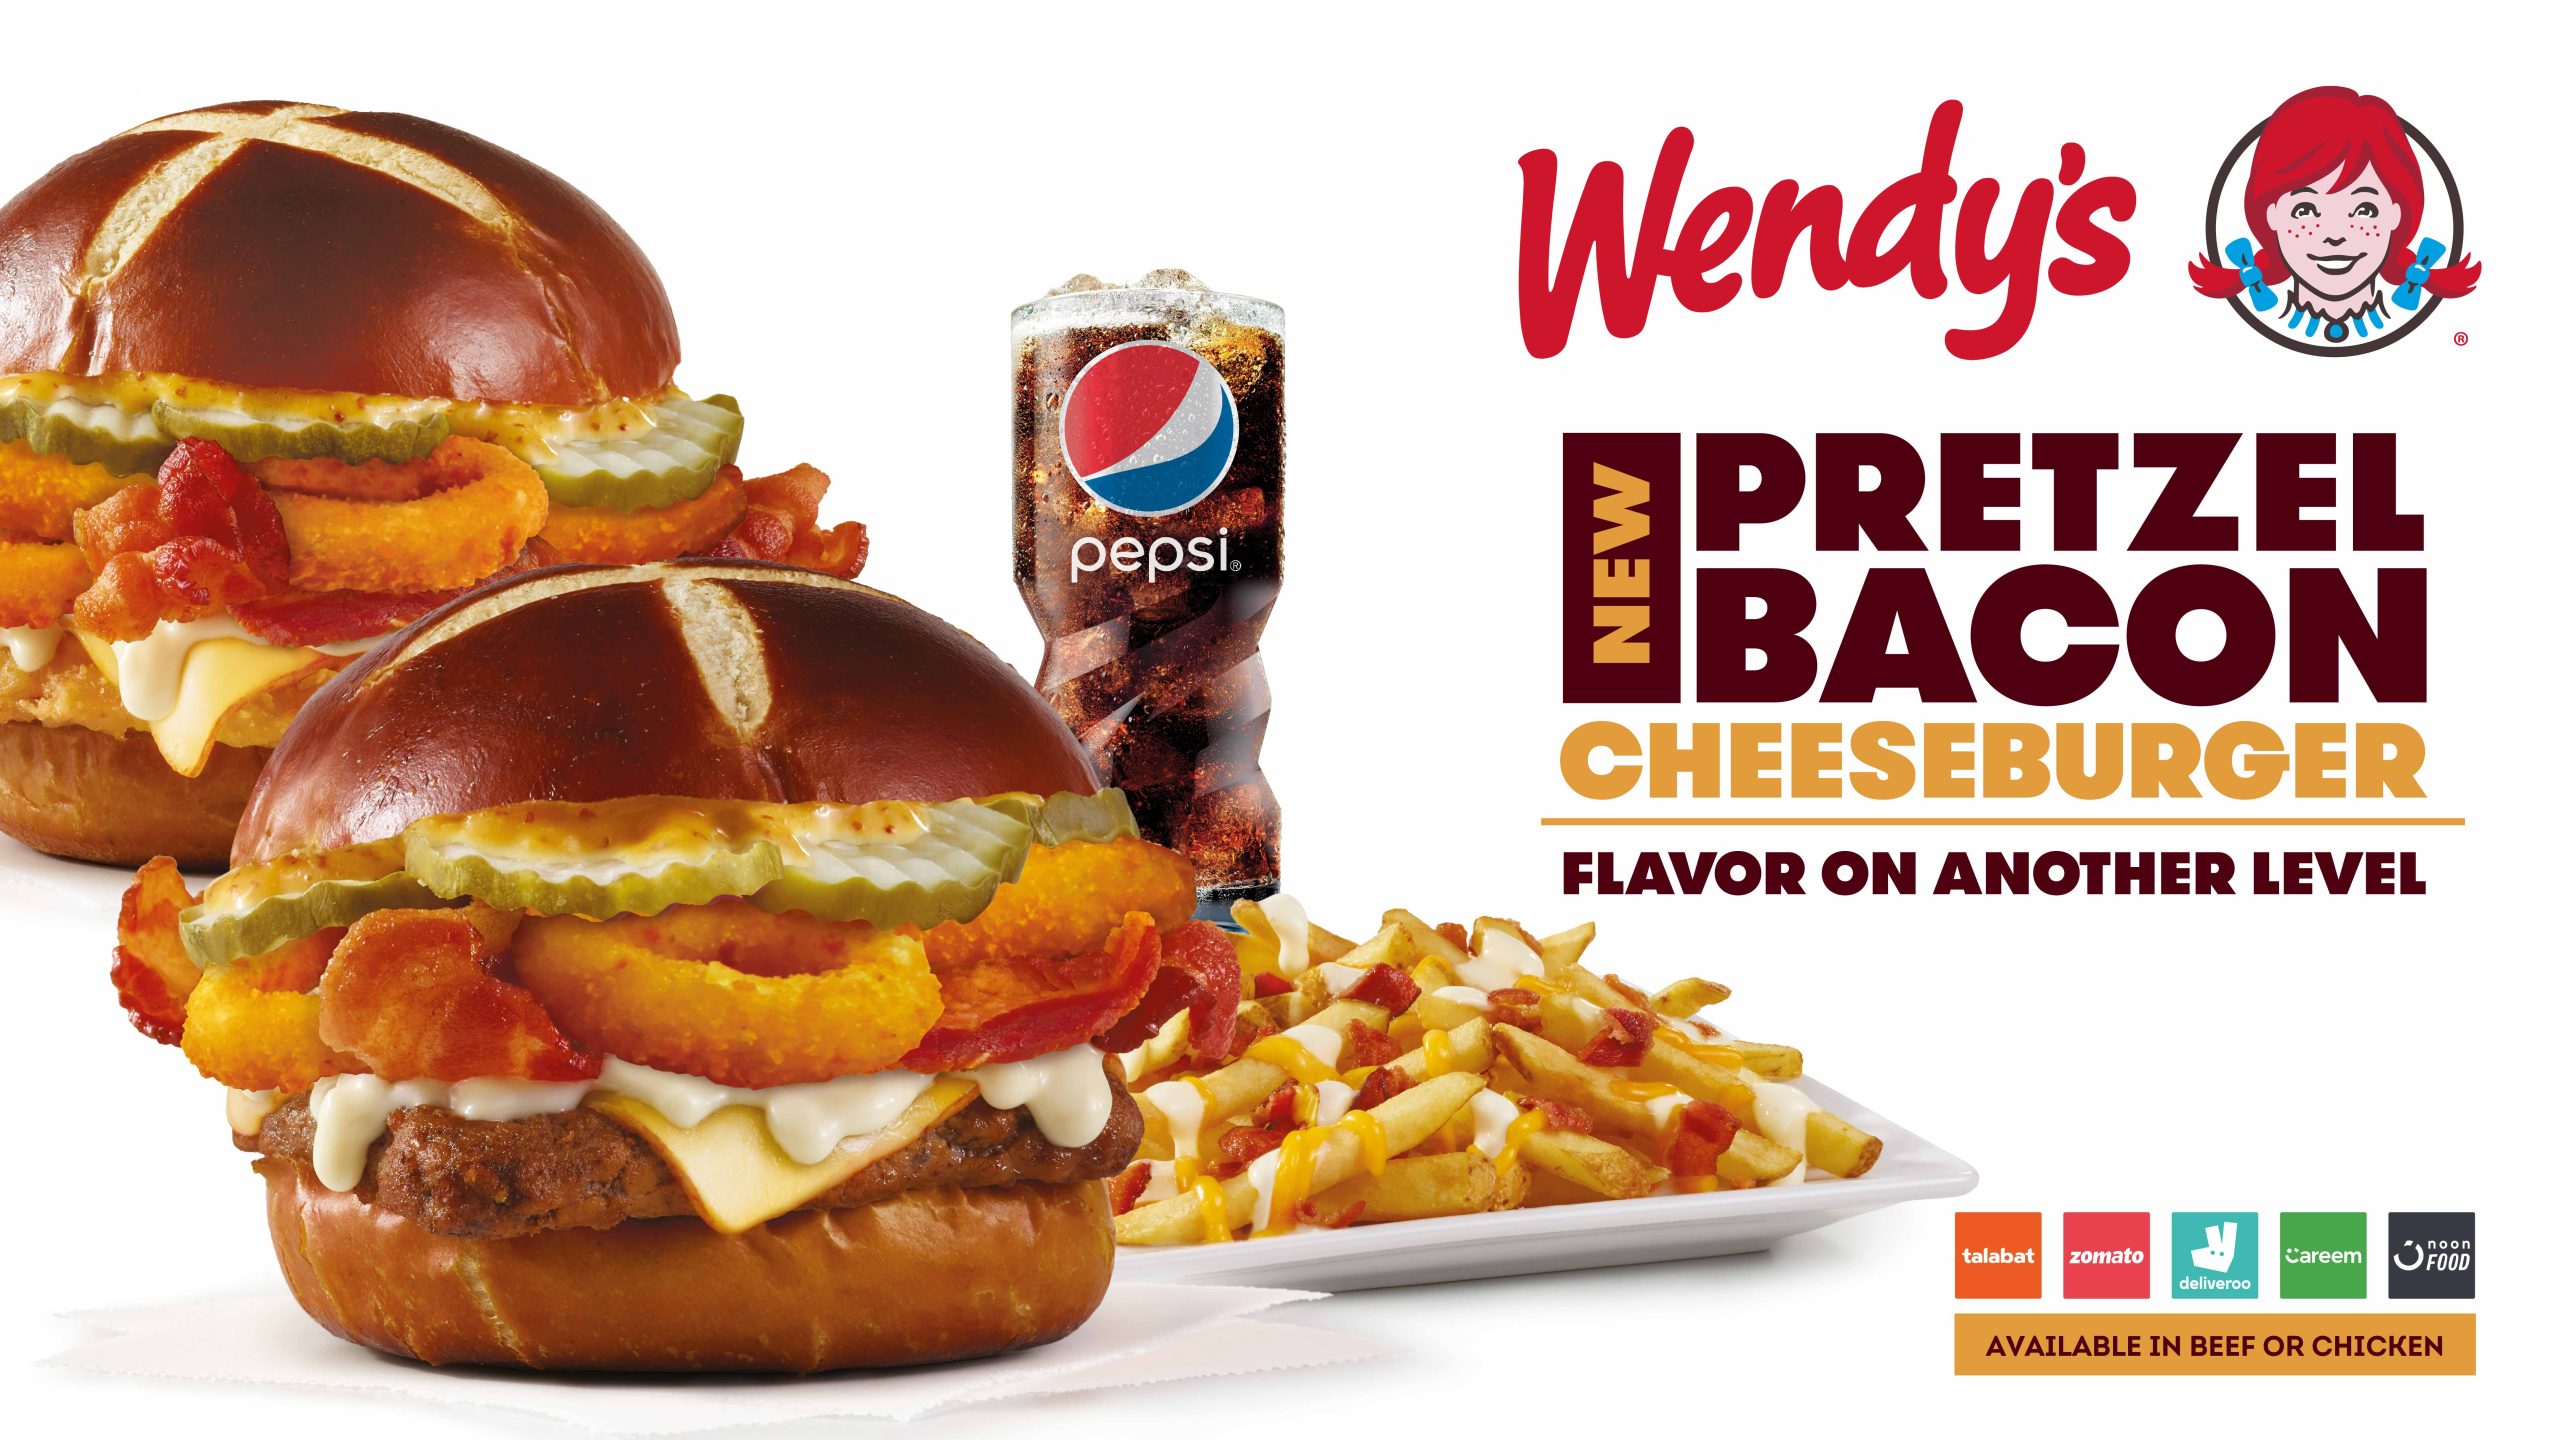 Savor Wendy’s mouthwatering Pretzel Bacon burgers, available for a